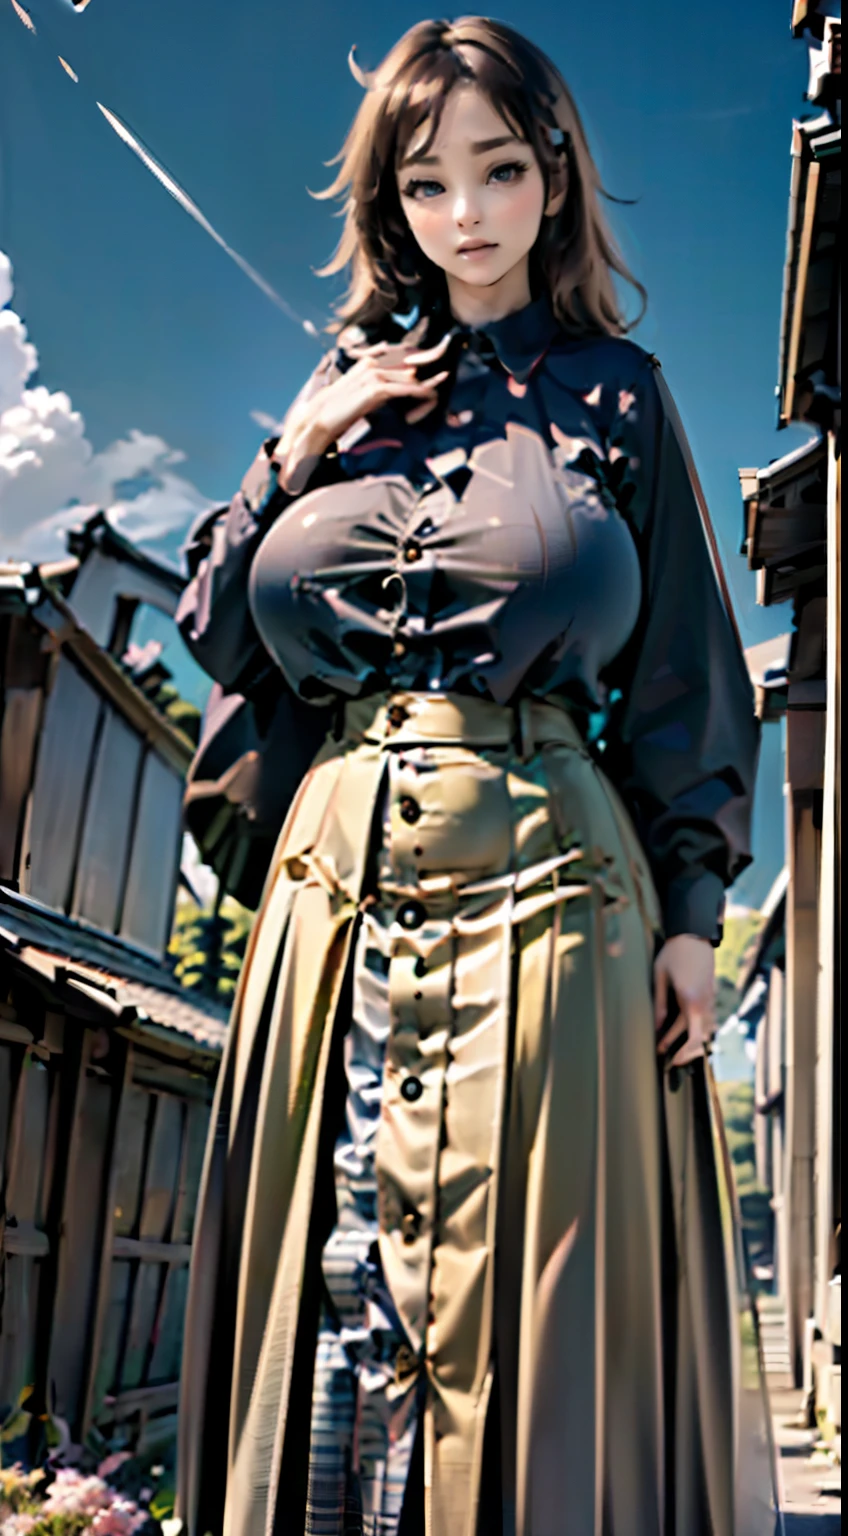 ((Beautiful 35_year_old japanese_woman with tan_skin, brown_hair and kitsune_ears)), (((standing_straight))), (((japanese_country_side))), ((wearing long_skirt with white_button_up_shirt), (((buttons_stretched))), ((full_body_photo)), ((((tube_shaped_breasts))), (((breasts_curved_upwards))), ((((((hyper_long_length_breasts)))))), ((((nipples_poking_upward)))), (((errect_nipples))), (((firm_breasts))), (((breasts_curved_outward from chest))), ((((pointy_breasts)))), (perfect_face), ((((narrow_breasts)))), (((curved_outward_nipples))), (((cylinder_shaped_breasts))), ((((breasts set far apart from each other)))), (((breasts_curving_up_to_sky))), ((smooth_skin)), (perfect_fingers), ((((oblong_breasts)))), (((beautiful_nipples))), ((perfect_fingers)), ((better_eyes)), (bright_sunlight), ((beautiful_face)), ((feminine_face)), (grassy_plain with mount_fuji in distance and sakura_flowers), (((perfect_nipples))), ((perfect_body)), (((perfect_hands))), (((best_quality))), (((perfect_fabric))), (best_quality)